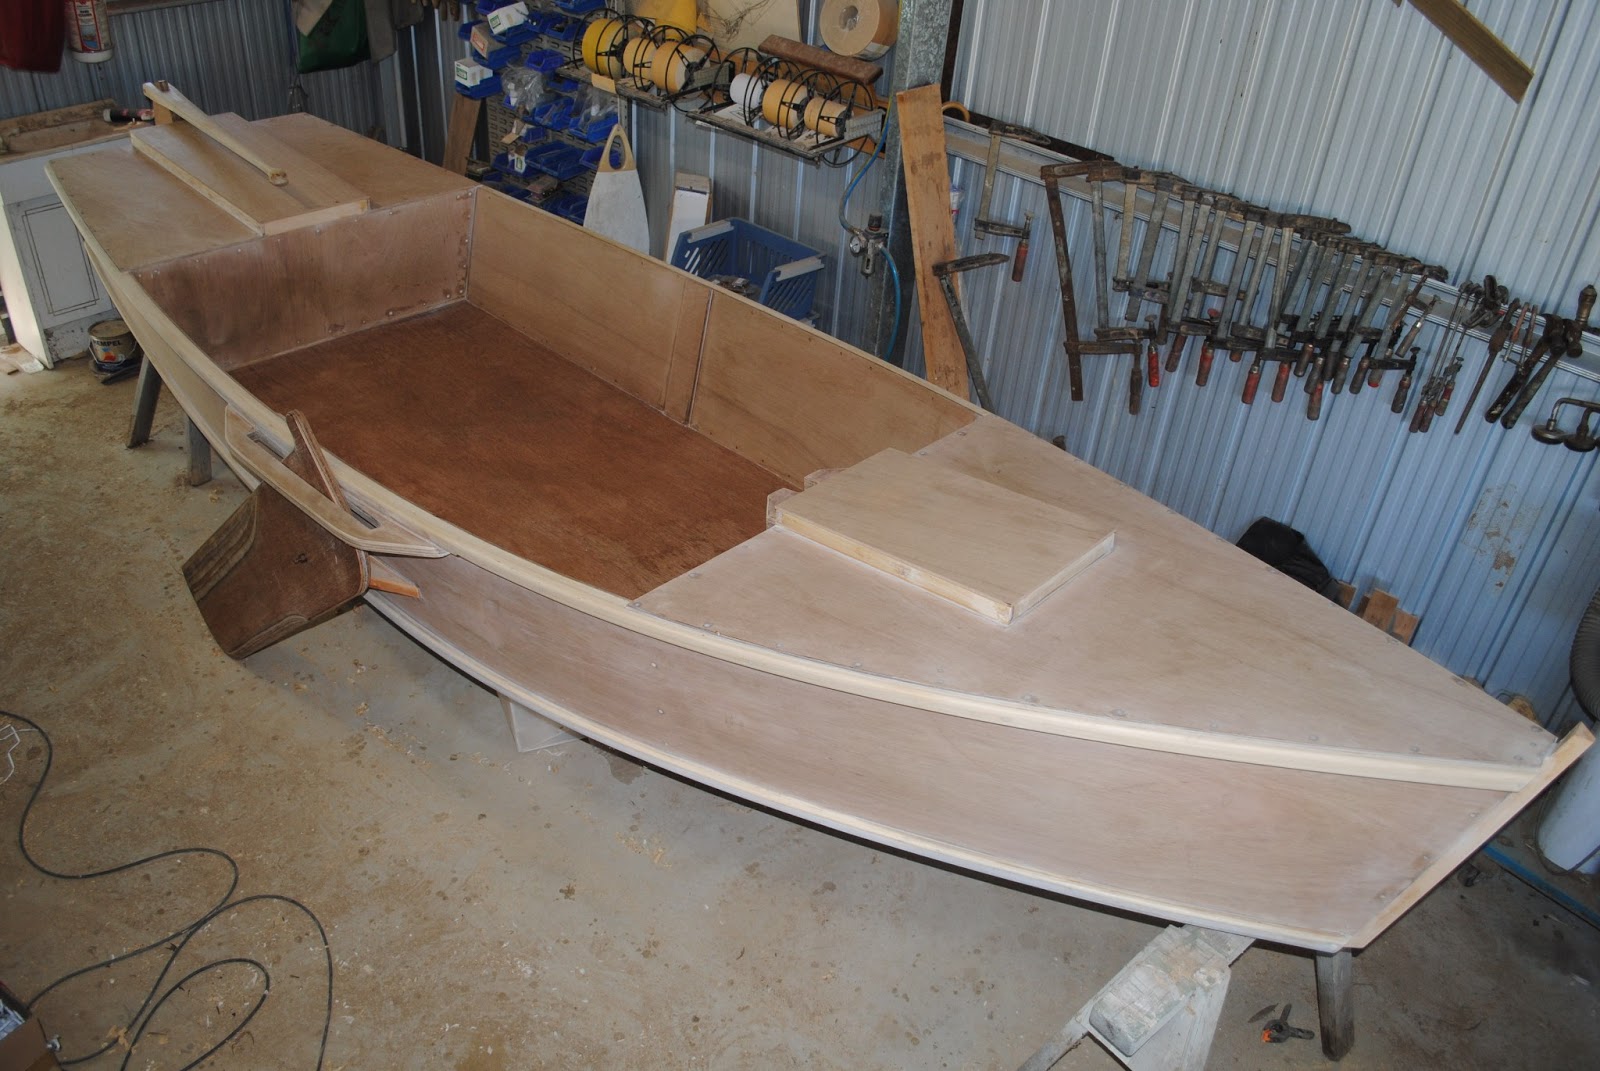 Ross Lillistone Wooden Boats: Catching Up on Some Comments